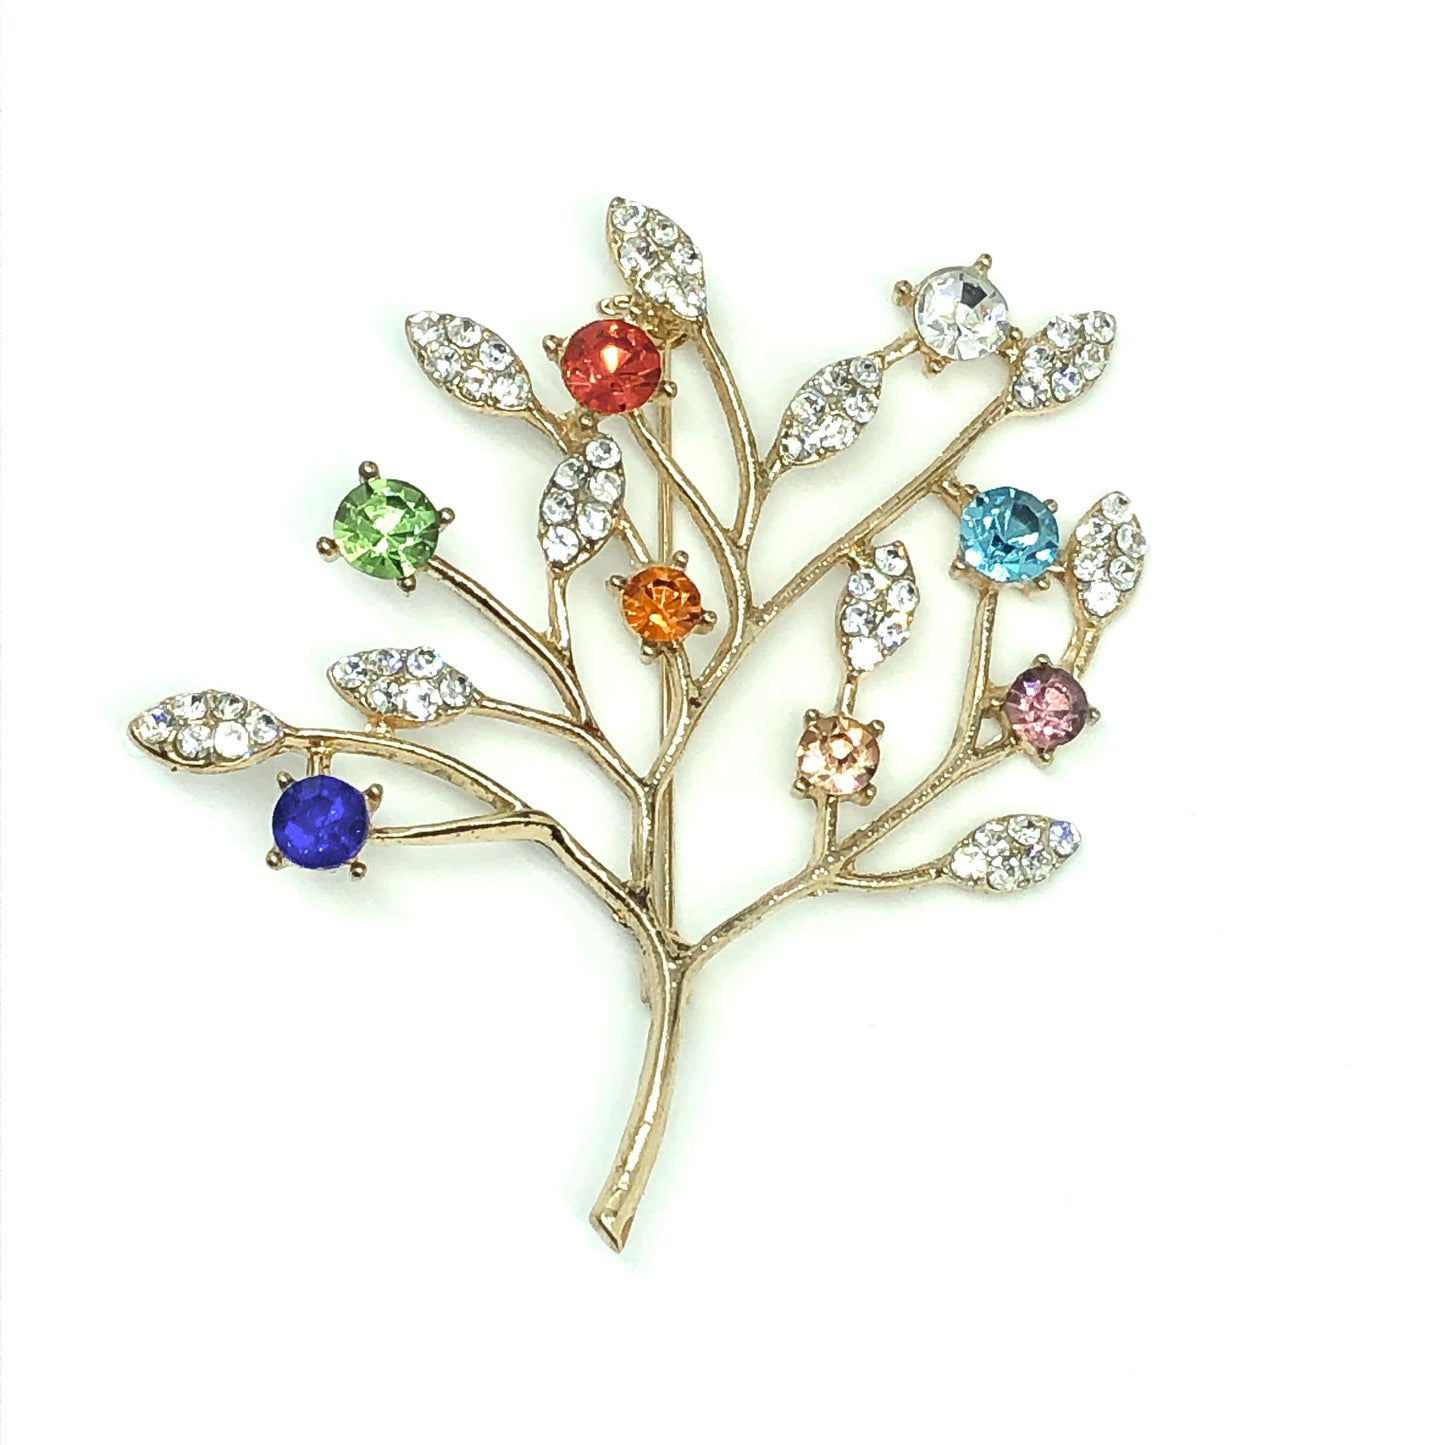 Womens Brooches | Sparkly Gold Rhinestone Crystal Lacy Tree Brooch | Discount Estate Jewelry online